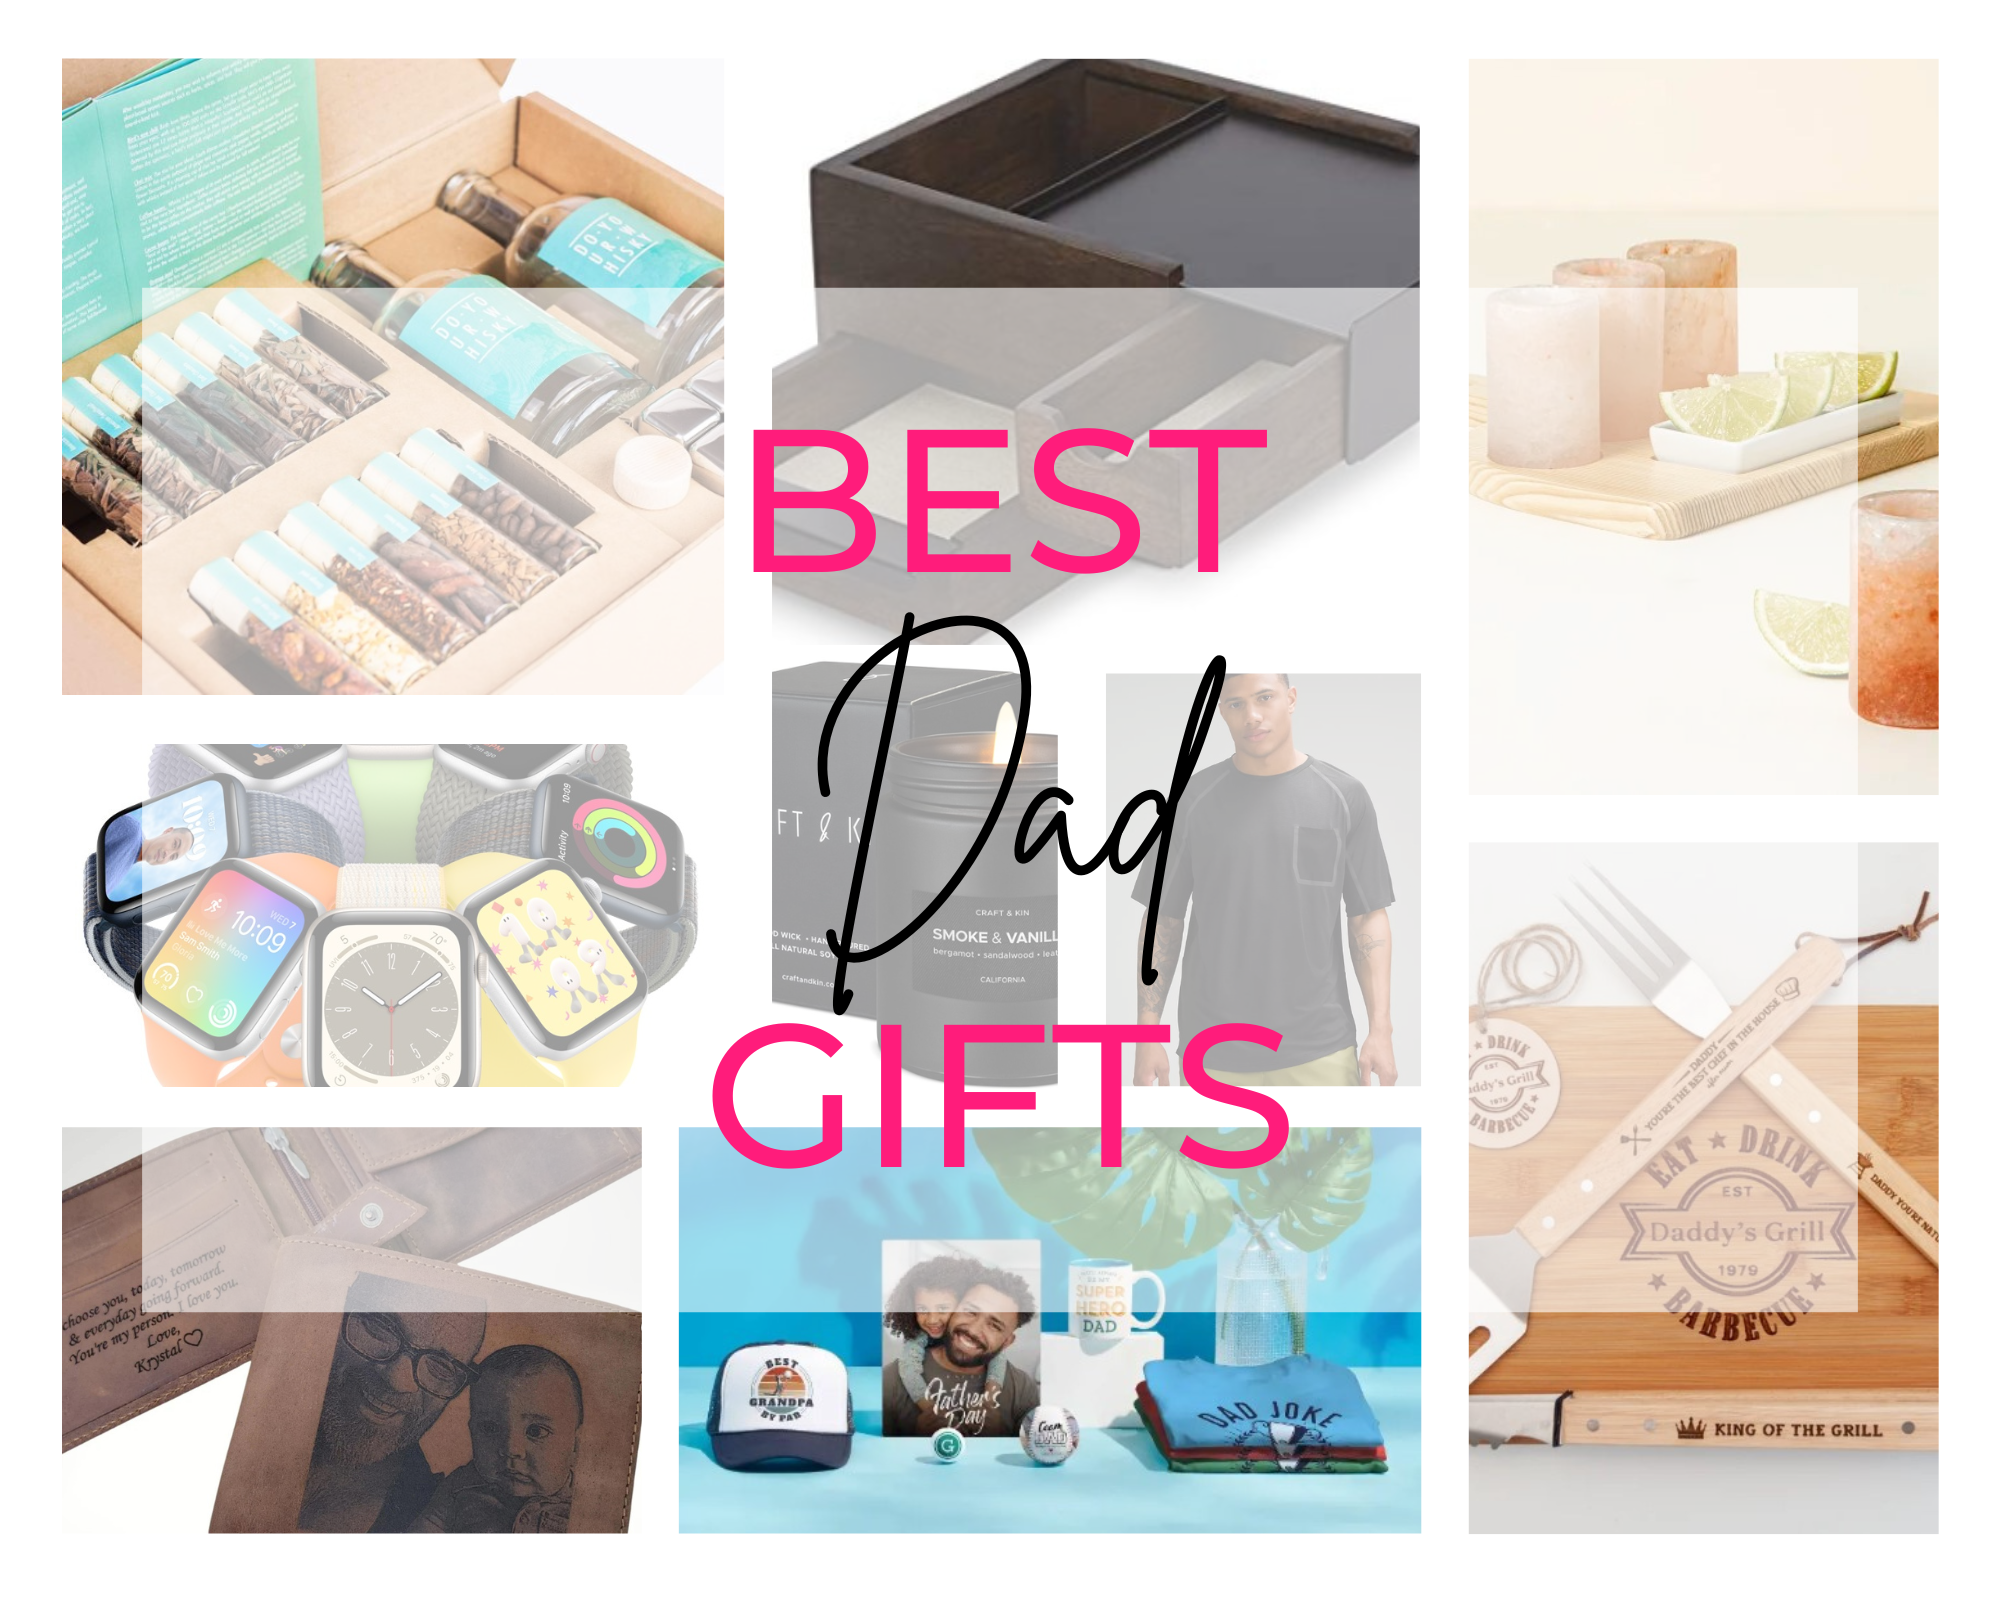 Unique gifts for dad who wants nothing